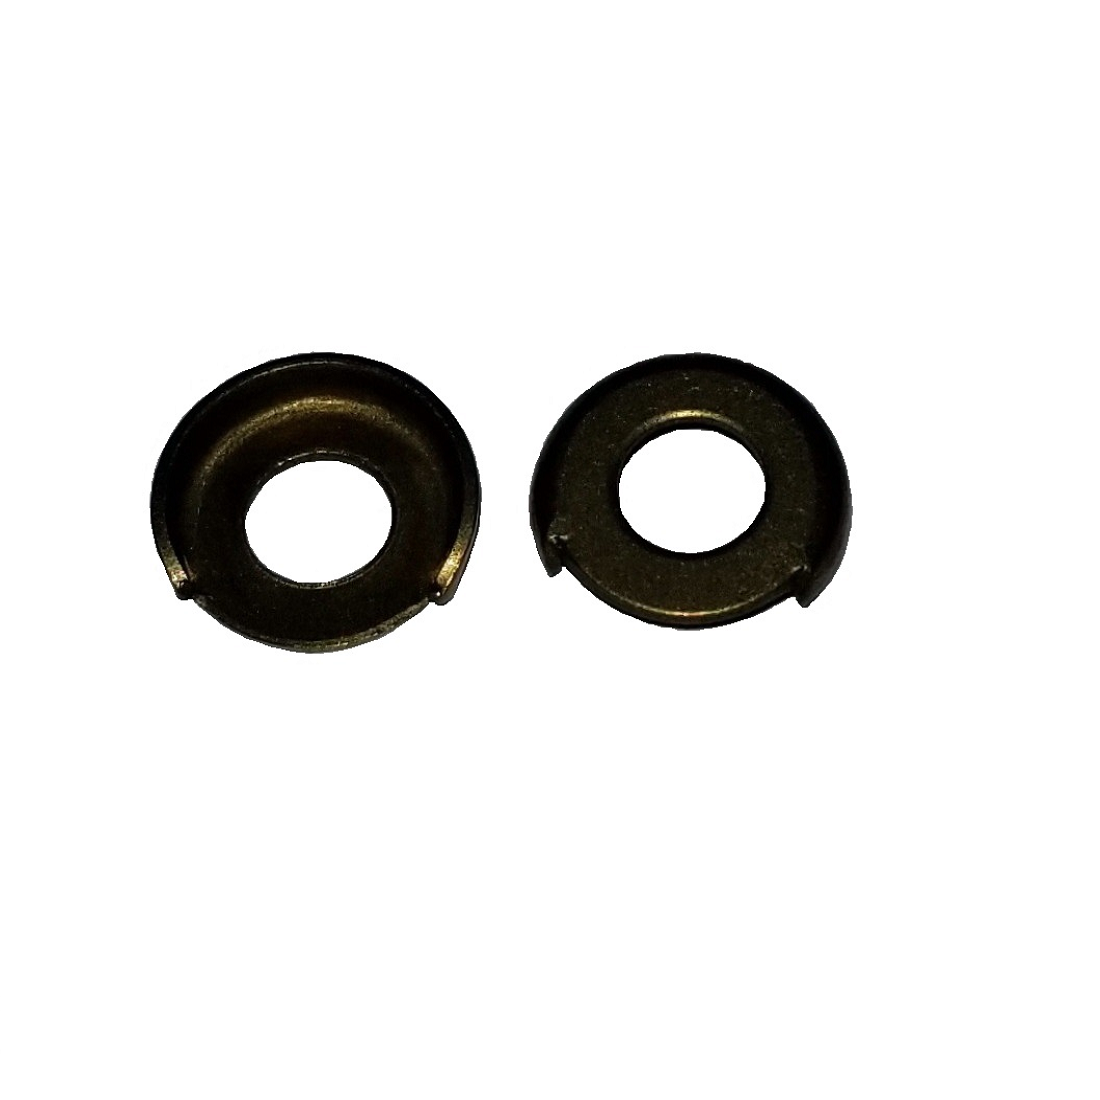 Terminal Cup Washer - 0.140 ID, 0.328 OD, 0.015 Thick, Brass